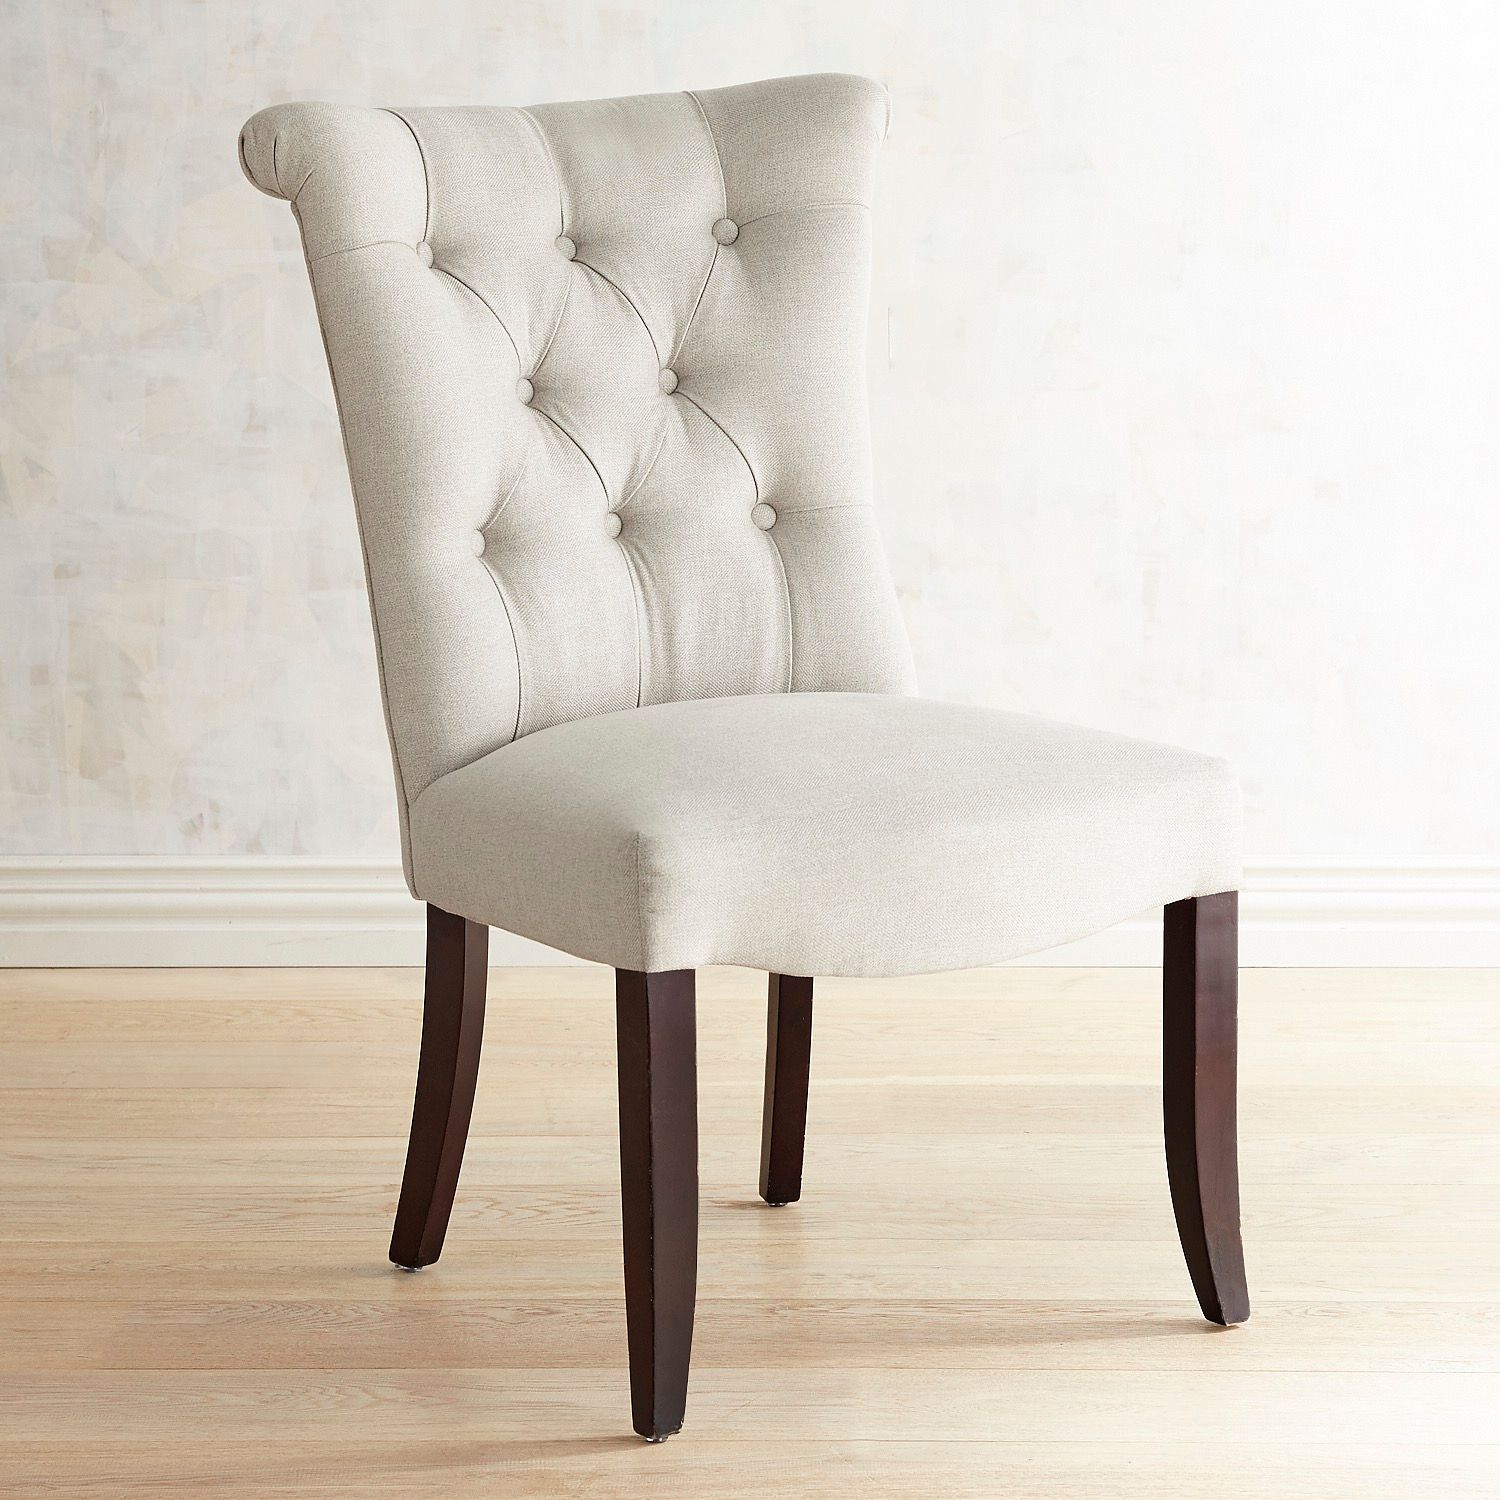 Colette Flax Dining Chair with Espresso Legs | Pier 1